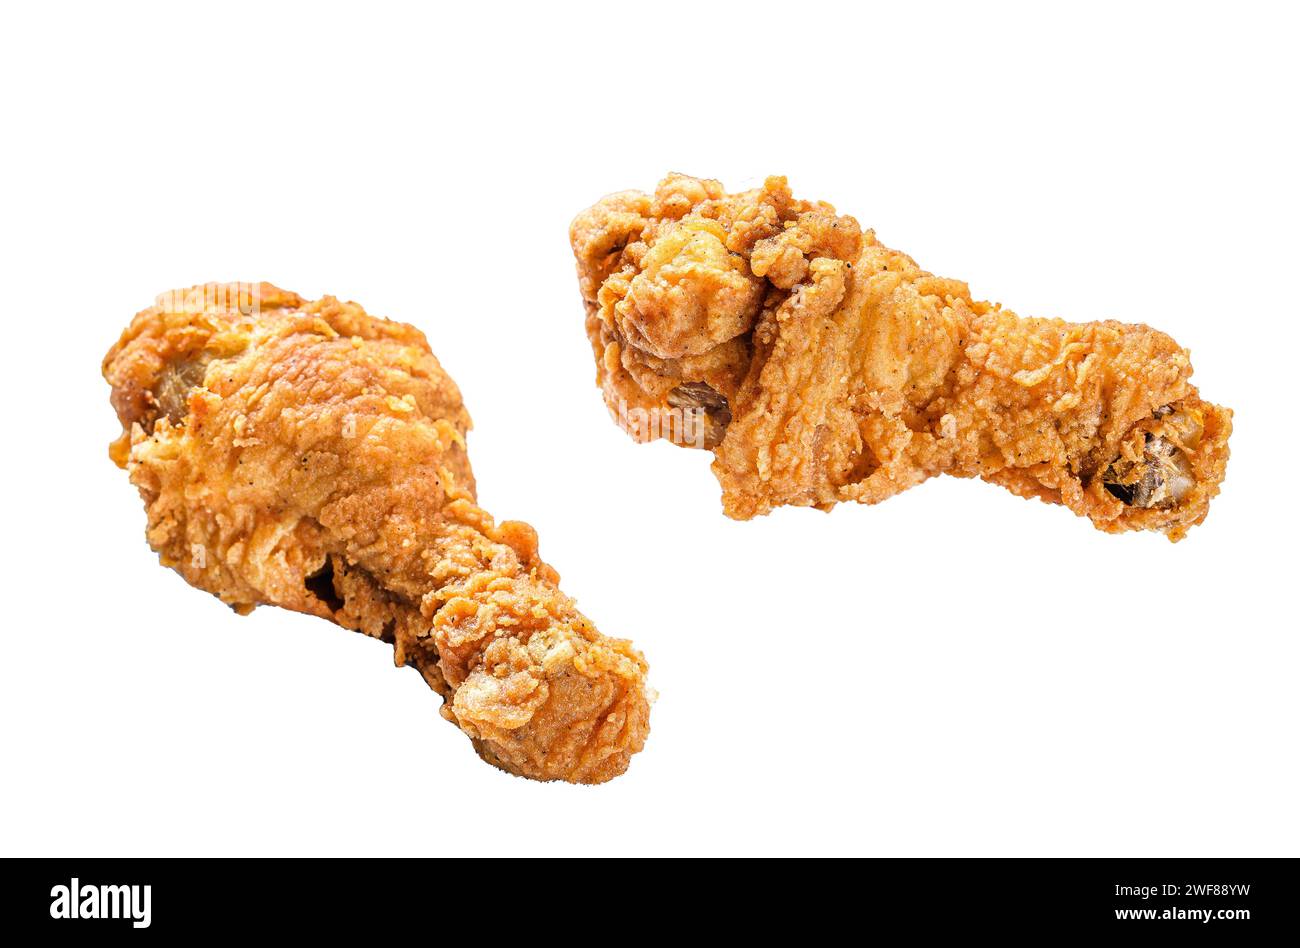 crispy kentucky fried chicken drumstick. Isolated on white background. Top view Stock Photo